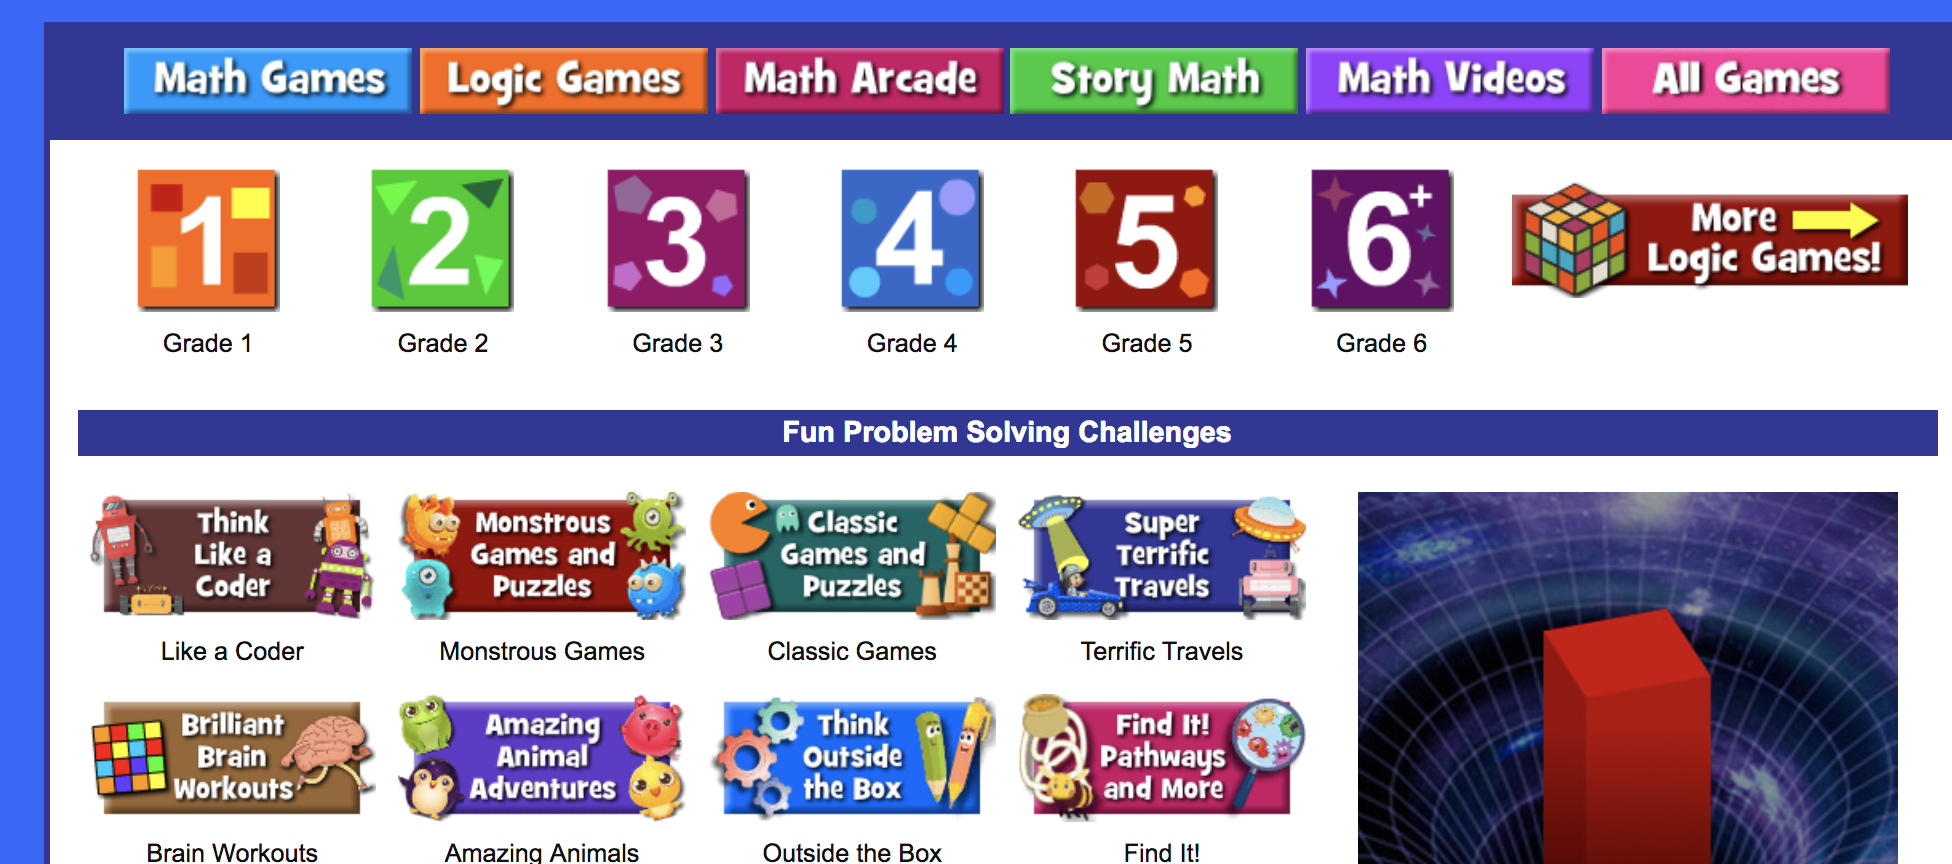 math-playground-games-review-student-tutor-education-blog